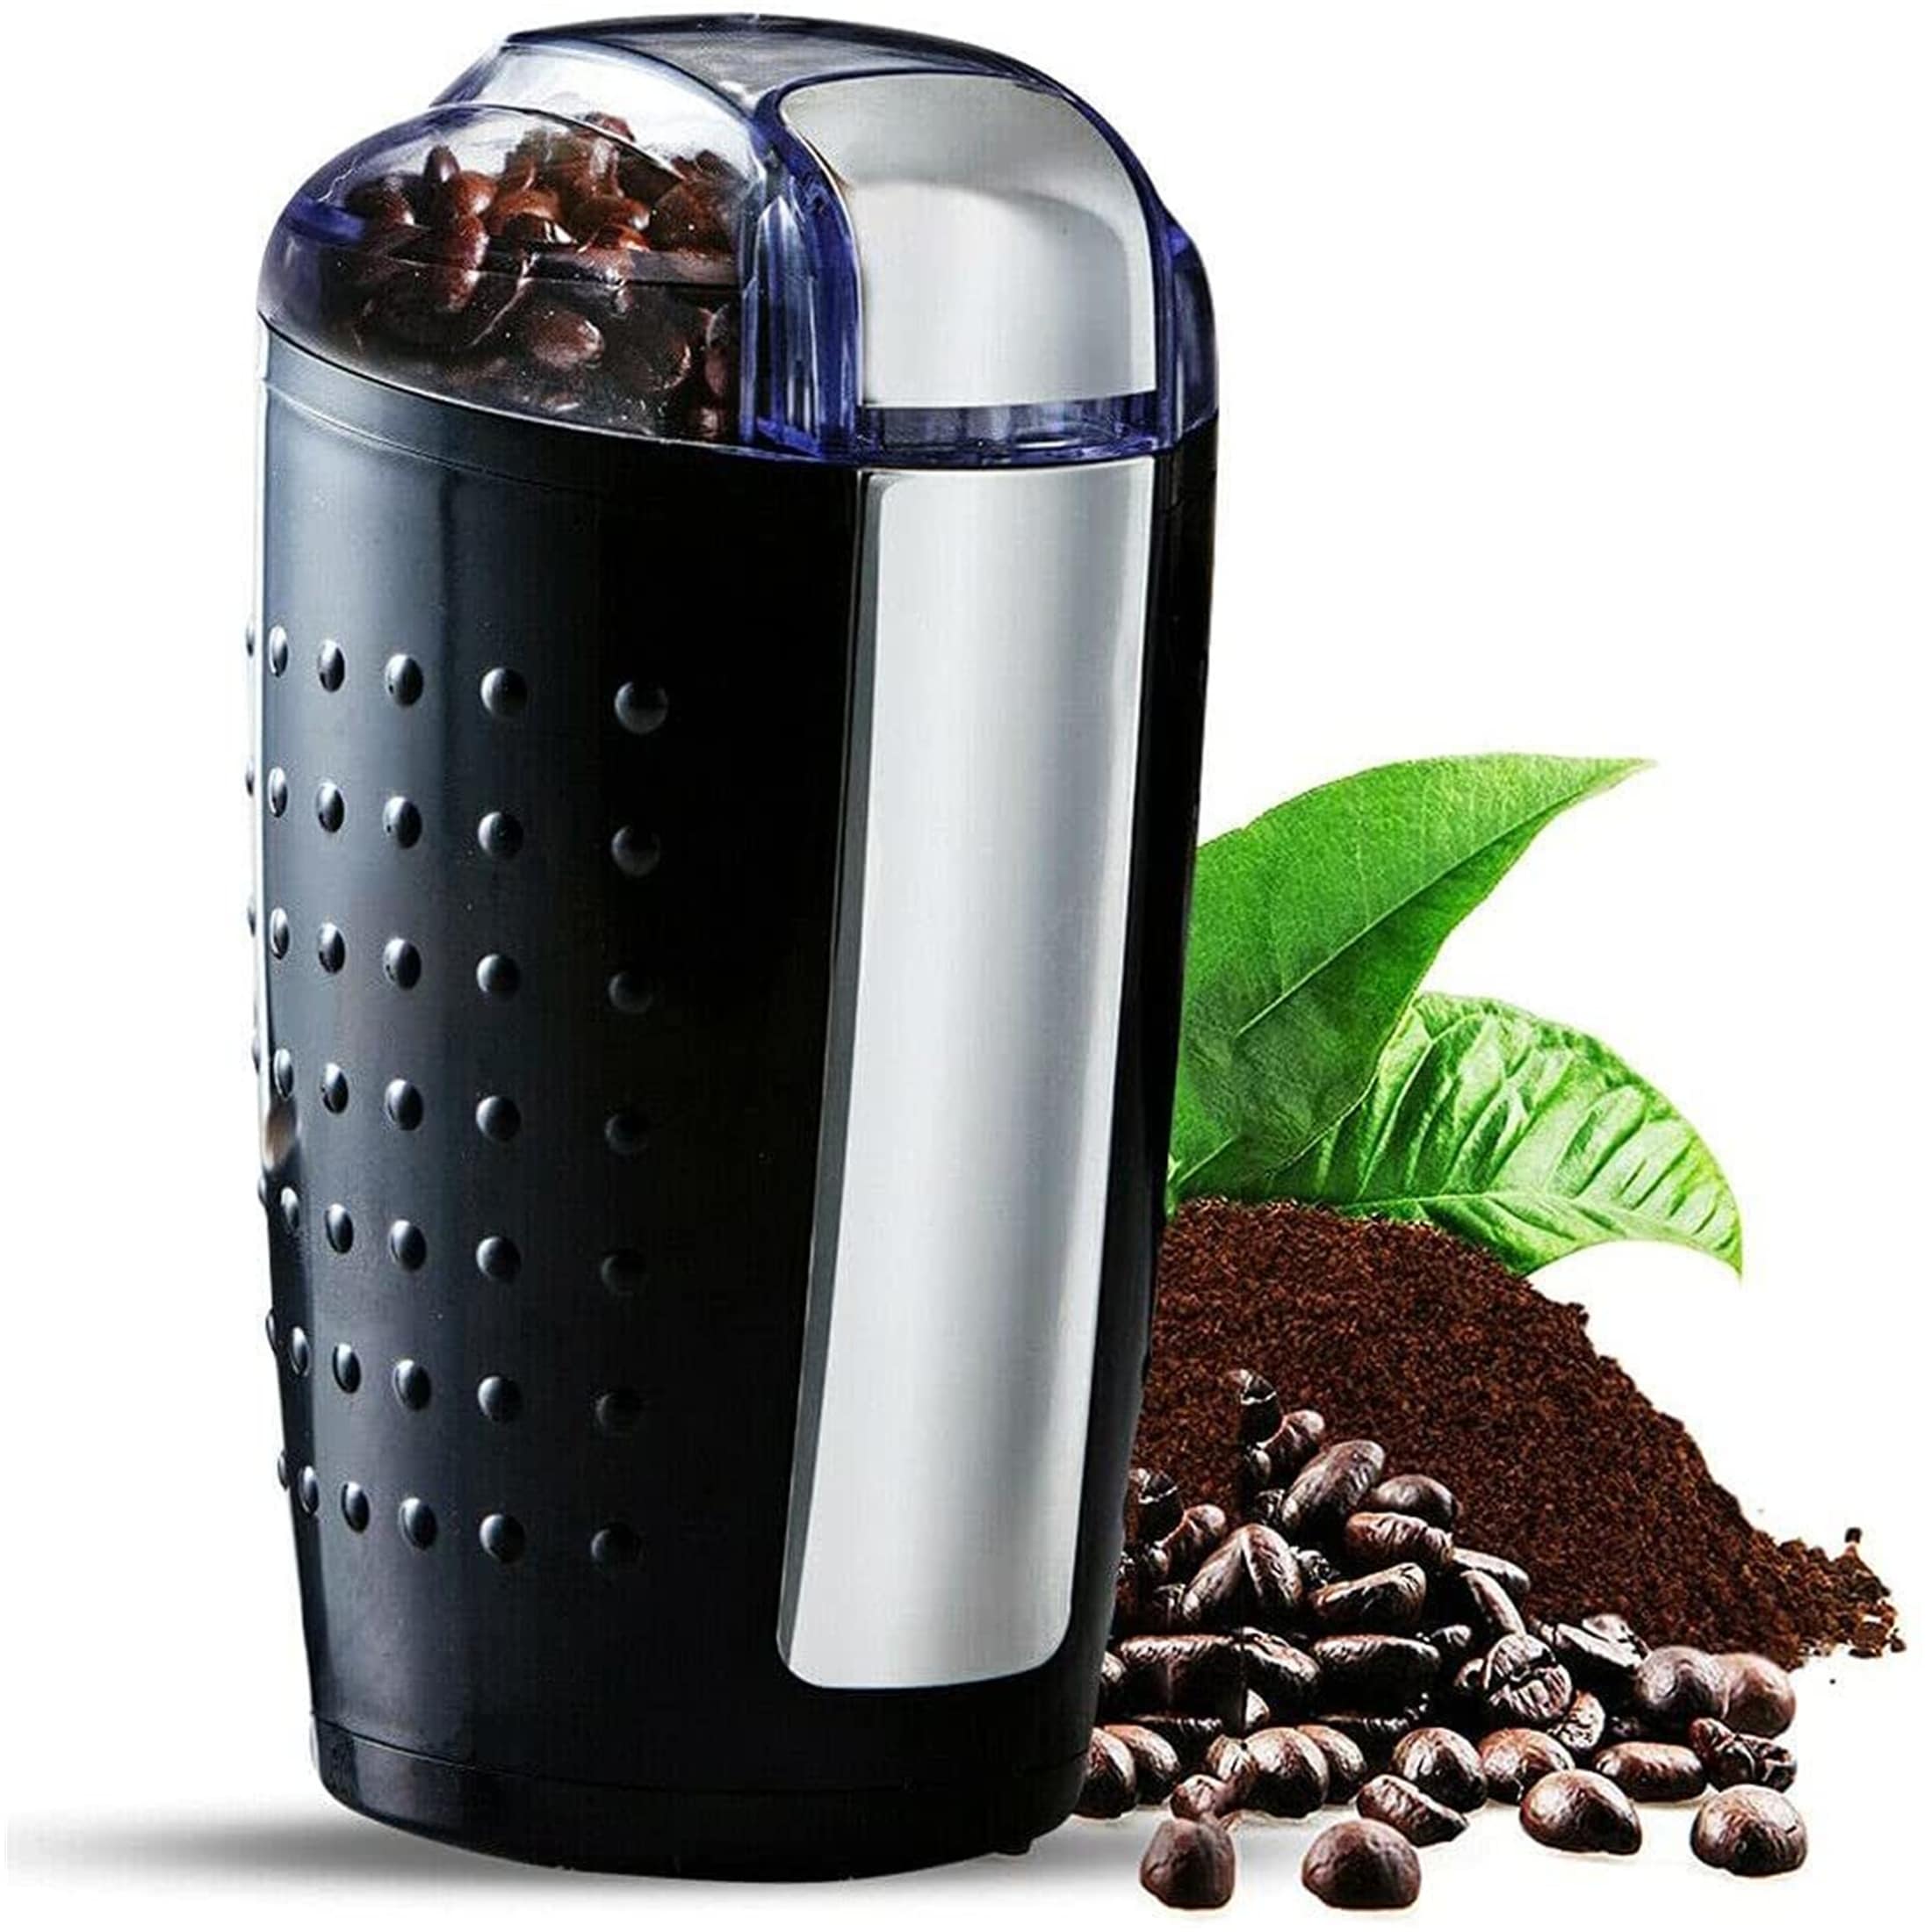 https://ak1.ostkcdn.com/images/products/is/images/direct/bf6374569faa548e861432f6a6a0369f5d5a2fd7/Coffee-Grinder-Spice-Nut-Grinders-Blender-Kitchen-Living-Room-Black.jpg